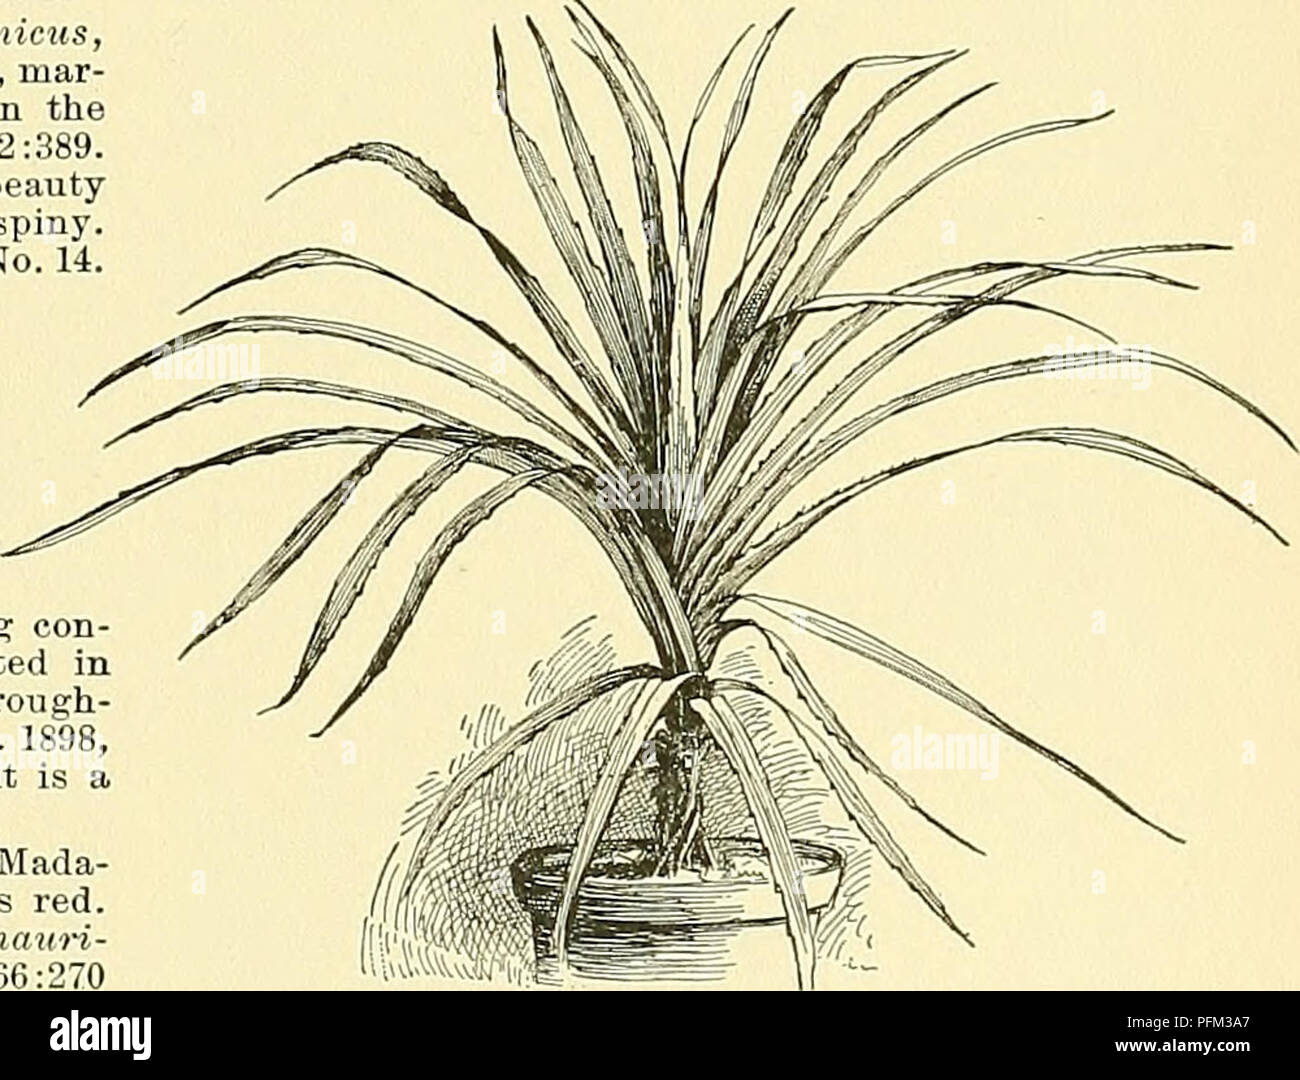 . Cyclopedia of American horticulture, comprising suggestions for cultivation of horticultural plants, descriptions of the species of fruits, vegetables, flowers, and ornamental plants sold in the United States and Canada, together with geographical and biographical sketches. Gardening. PANDANUS PANDANUS 1201 The growth of the plant also appears more graceful, the leaves being recurved in a more pleasing manner, and suckers very freely. j. 0. Eisele. Baptistii. 3. Candelabrum, 2. 14, caricosus, 11. Forsteri, 6. Fosterianus, 6. furcatus, 9. INDEX. grarainifolius, 8. heteroearpus, 10. Javanimis, Stock Photo